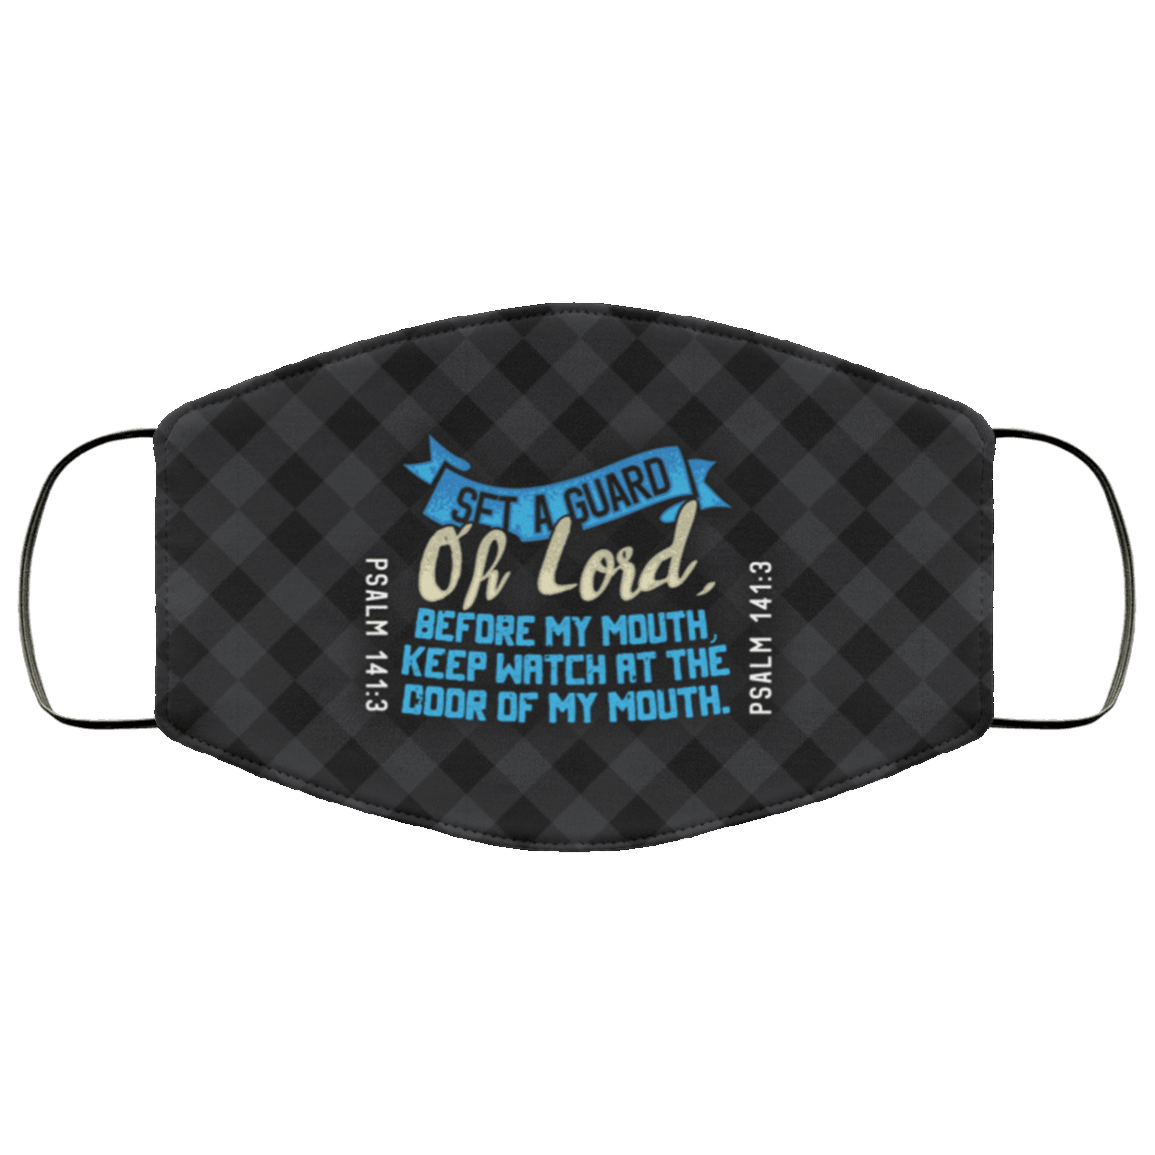 Designs by MyUtopia Shout Out:Set a Guard Oh Lord before My Mouth Adult Fabric Face Mask with Elastic Ear Loops,3 Layer Fabric Face Mask / Black / Adult,Fabric Face Mask